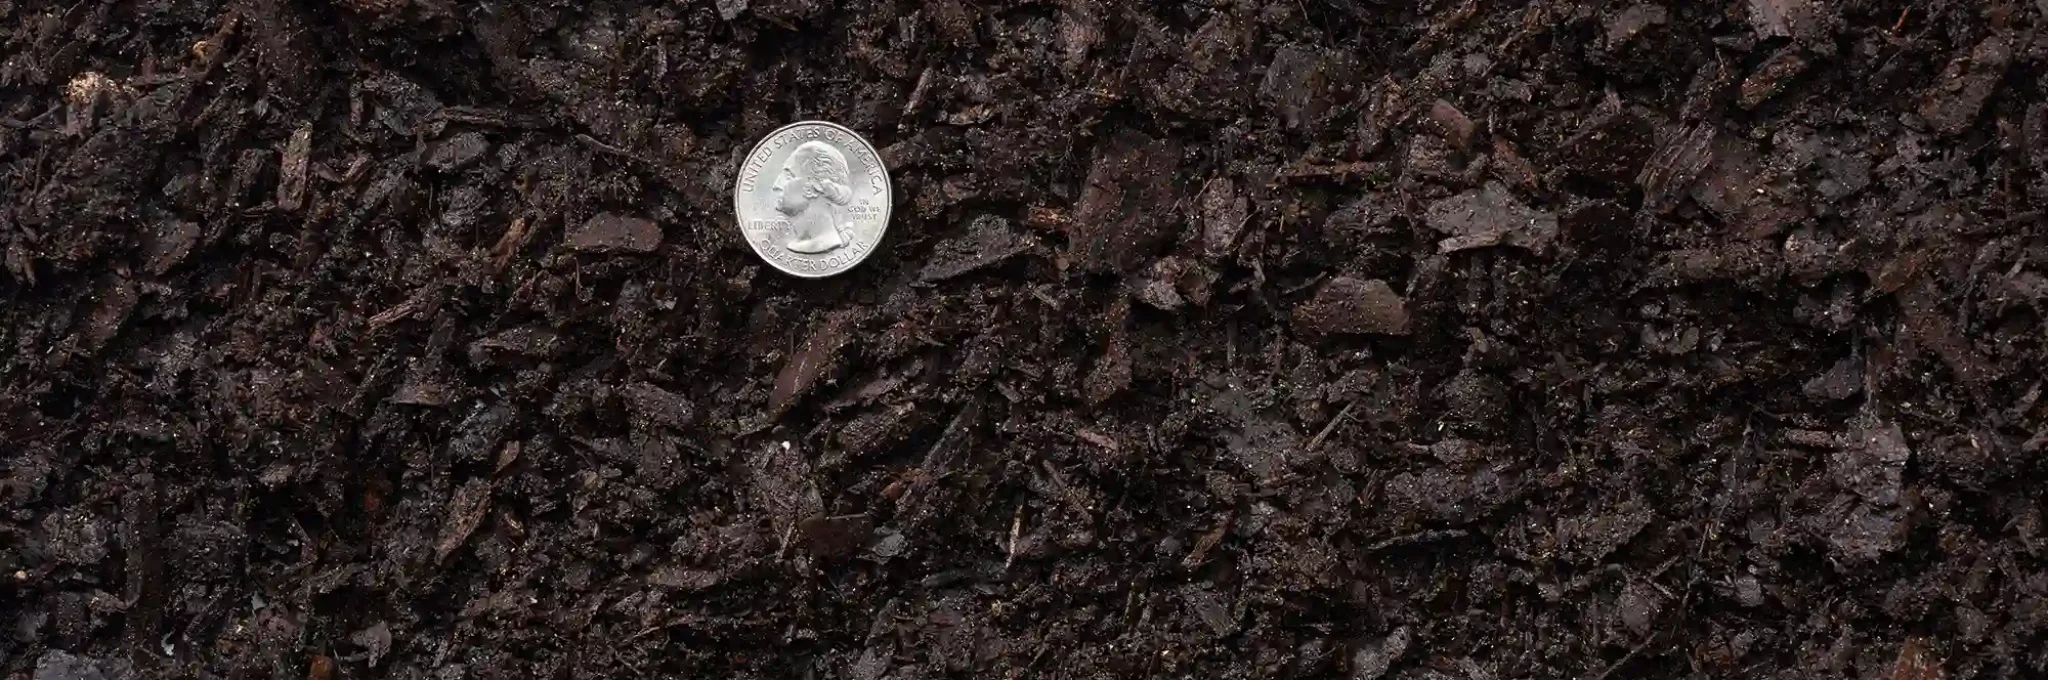 A close-up view of COMAND Scape Professional-Grade Planting Soil showing a U.S. quarter for scale.